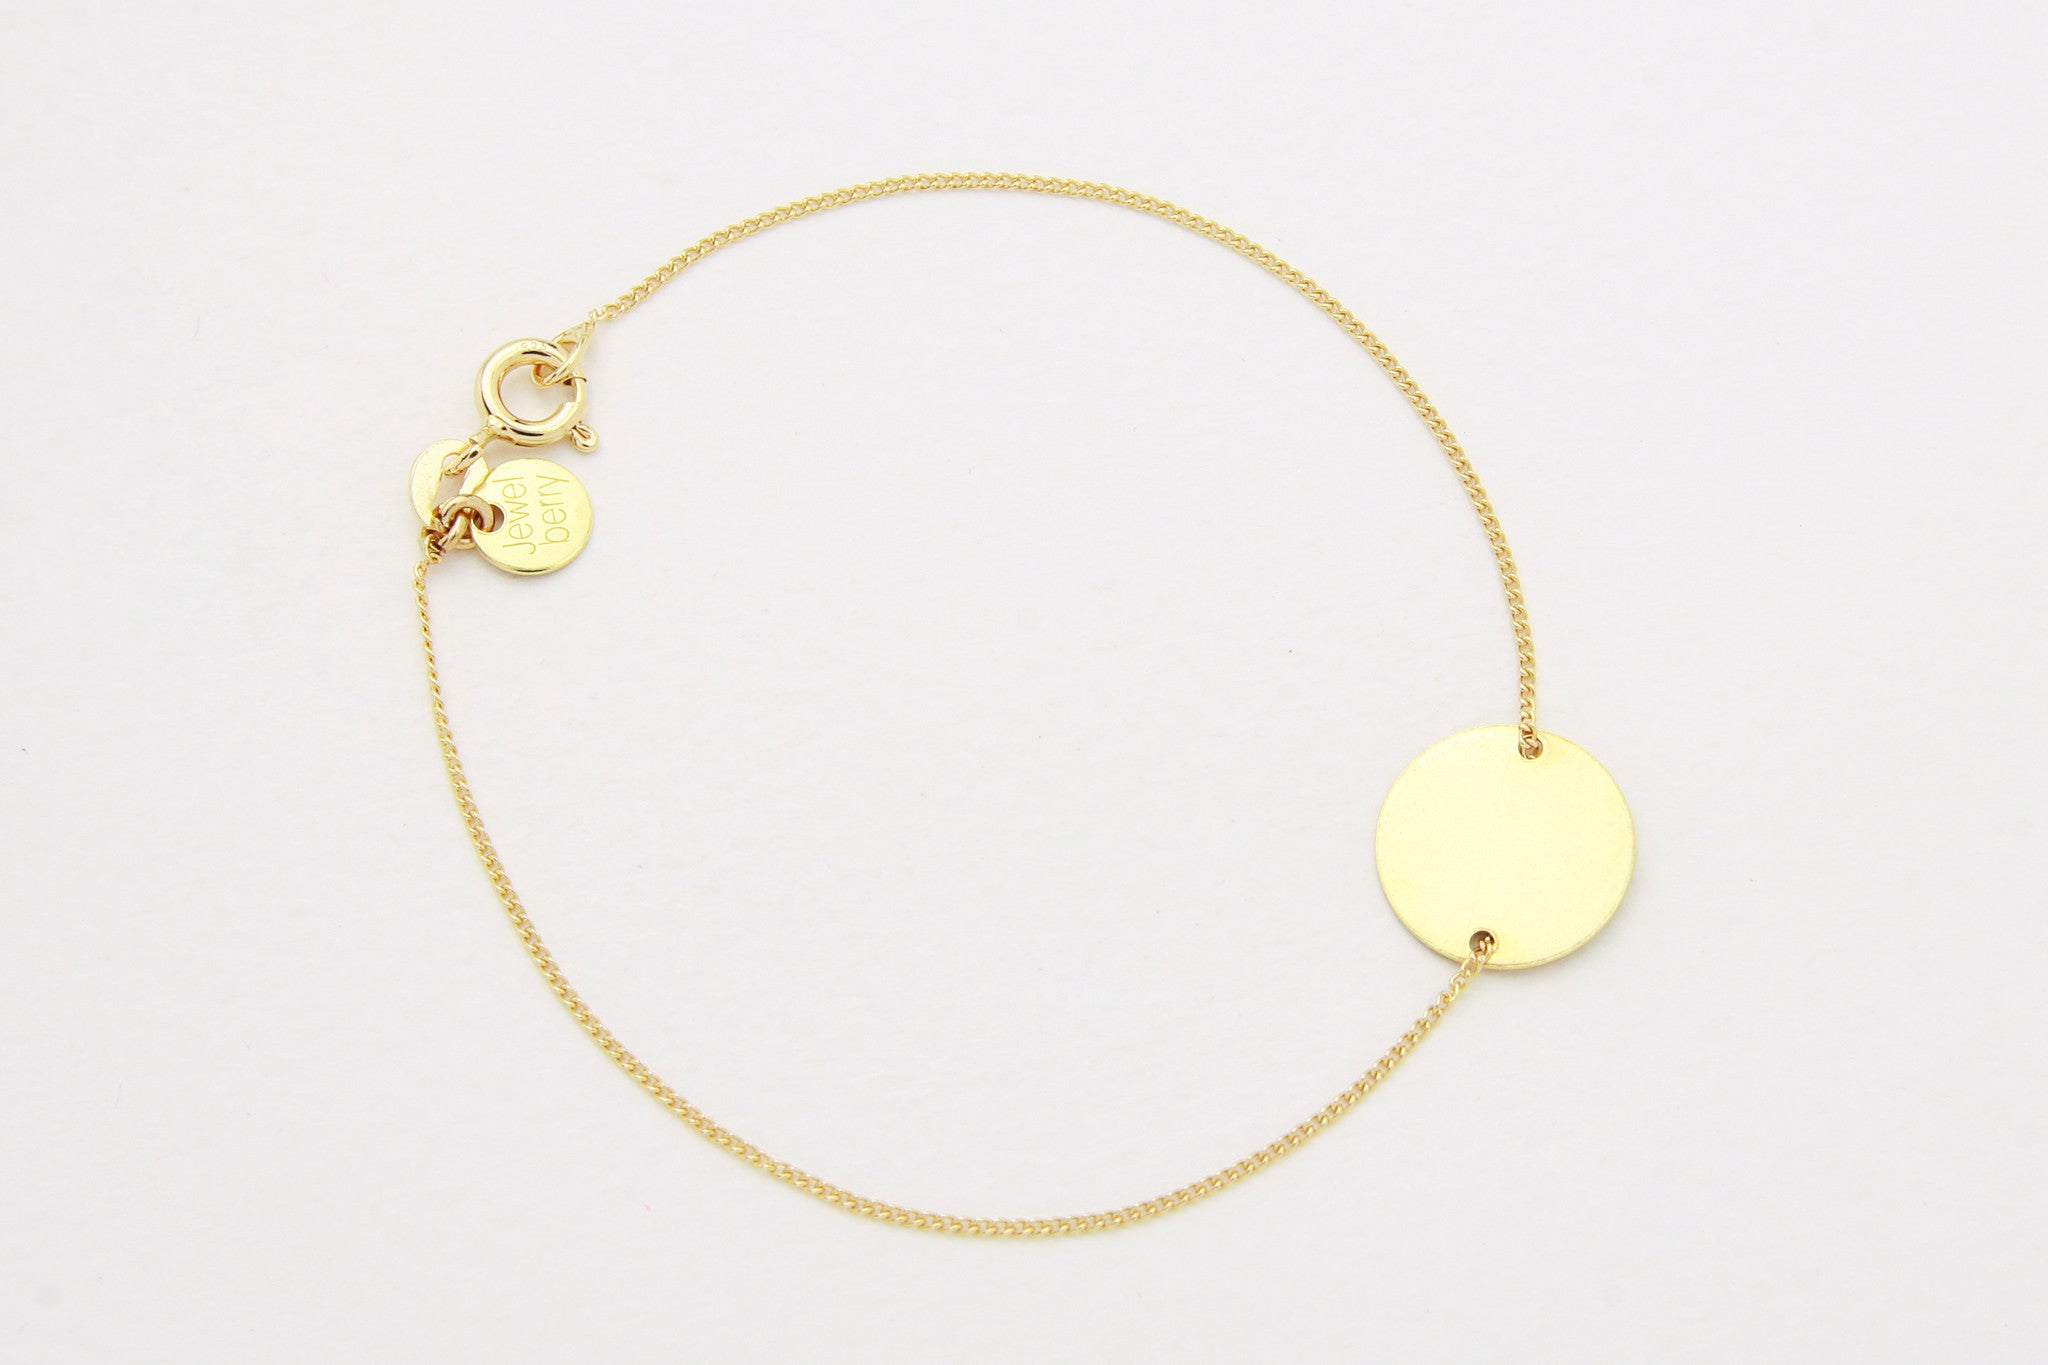 jewelberry armband bracelet medium disc double yellow gold plated sterling silver fine jewelry handmade with love fairtrade curb chain